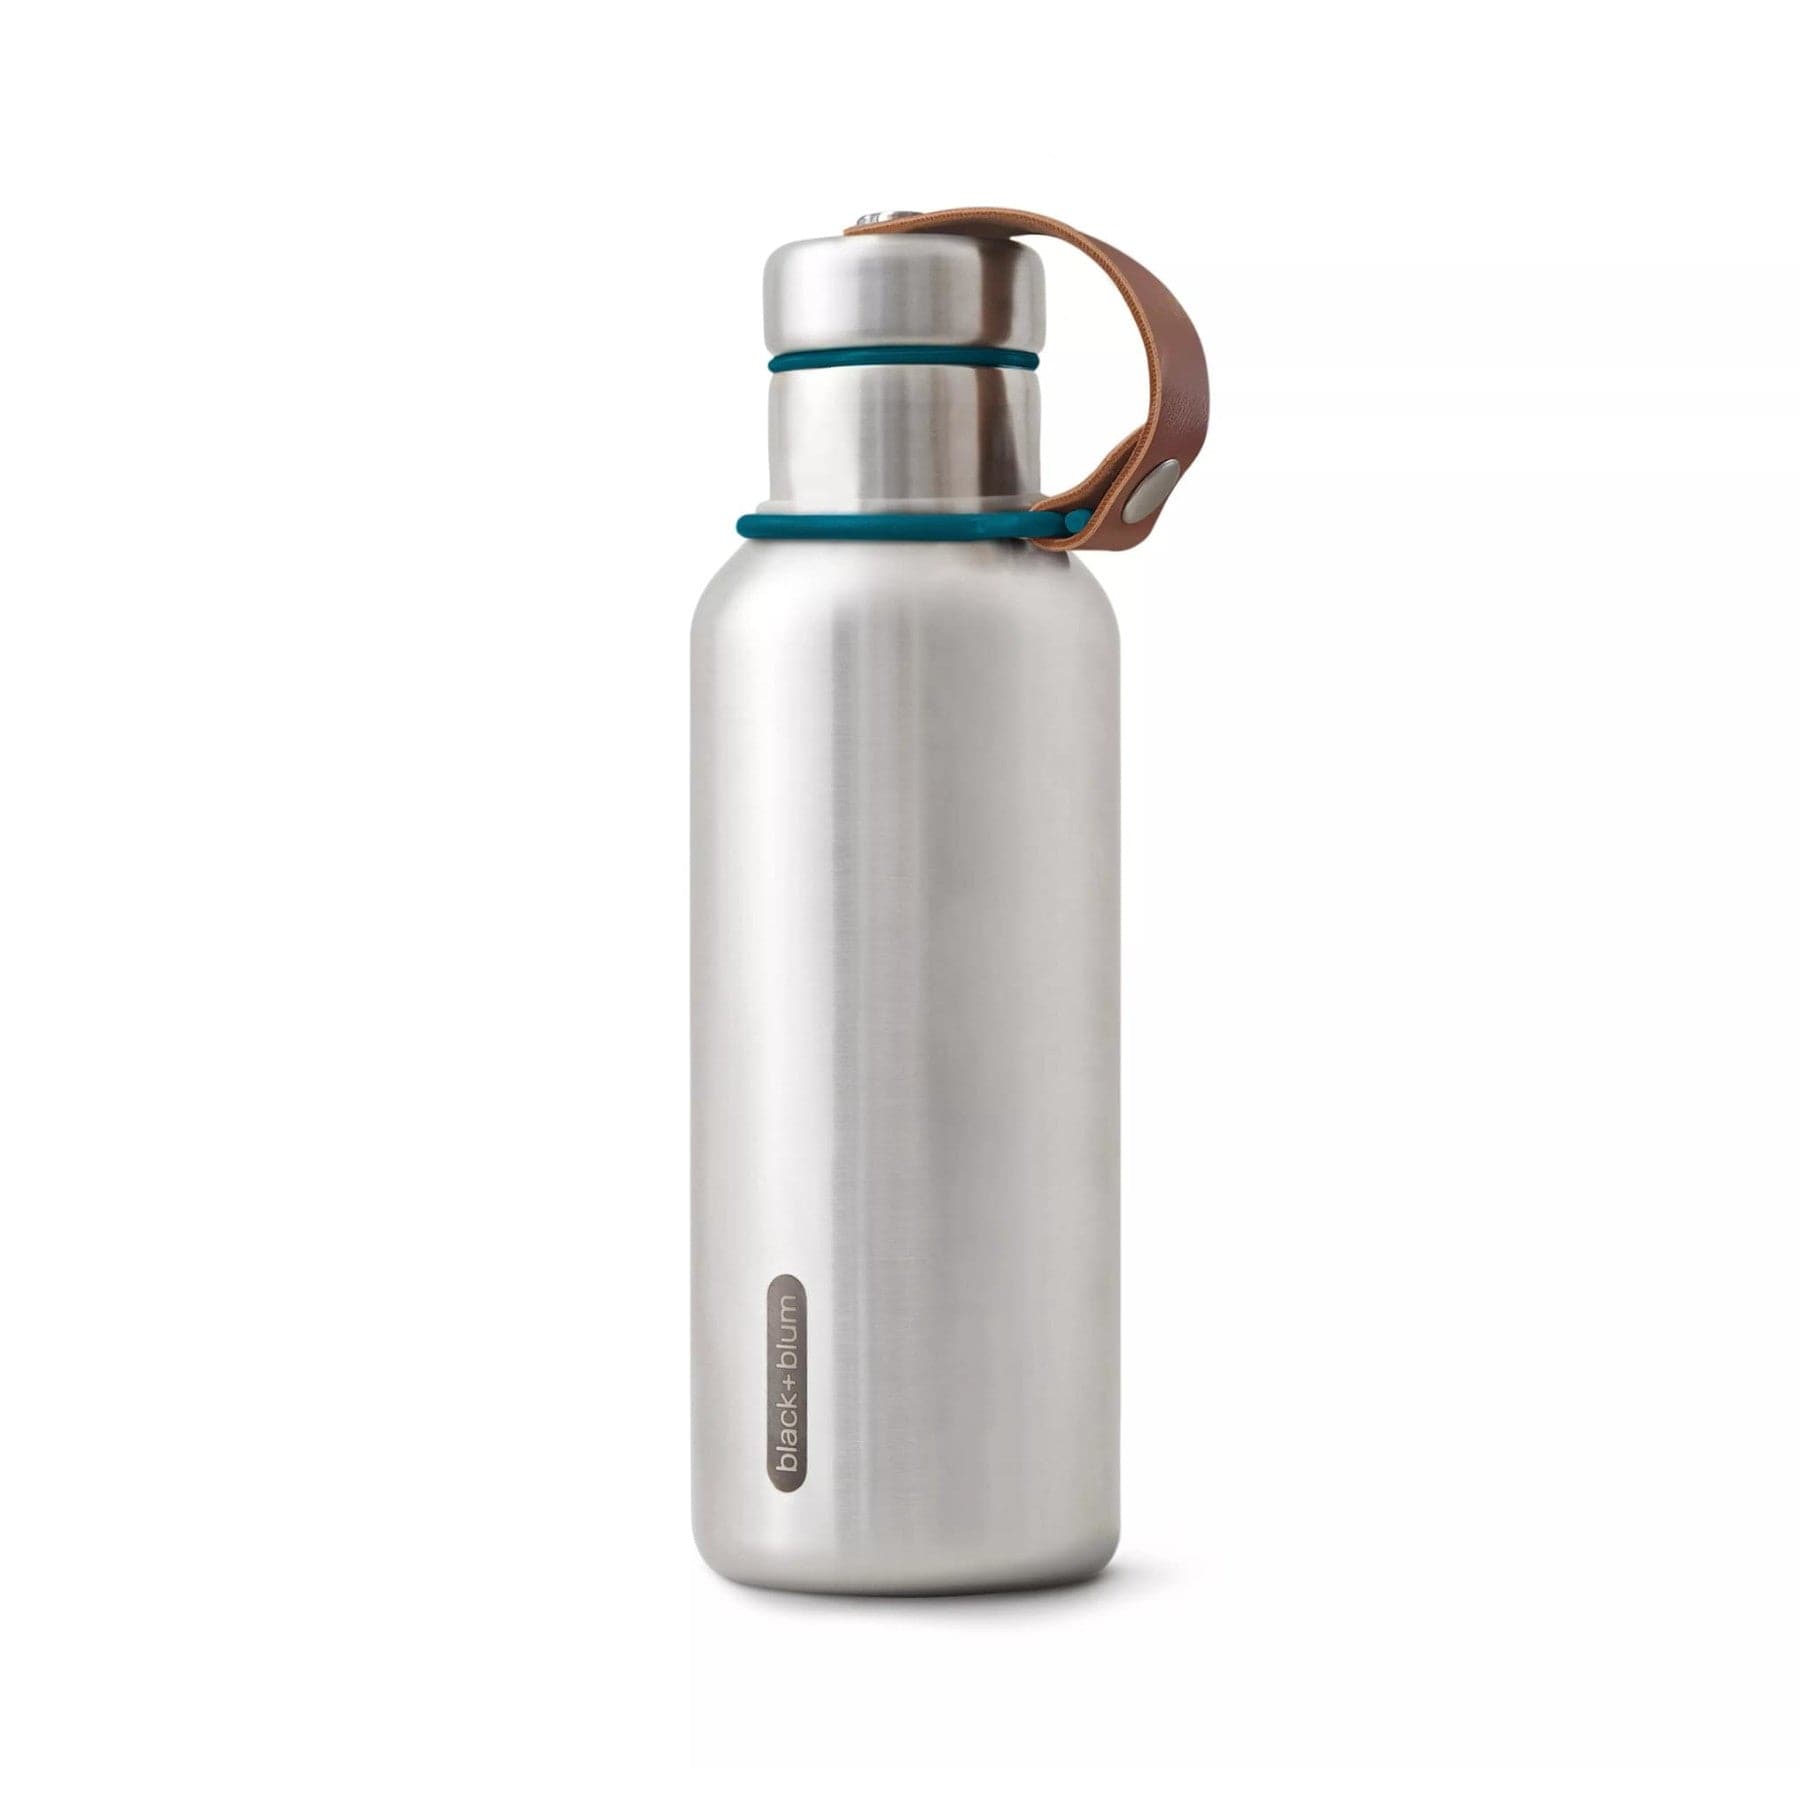 Insulated water bottle 500ml